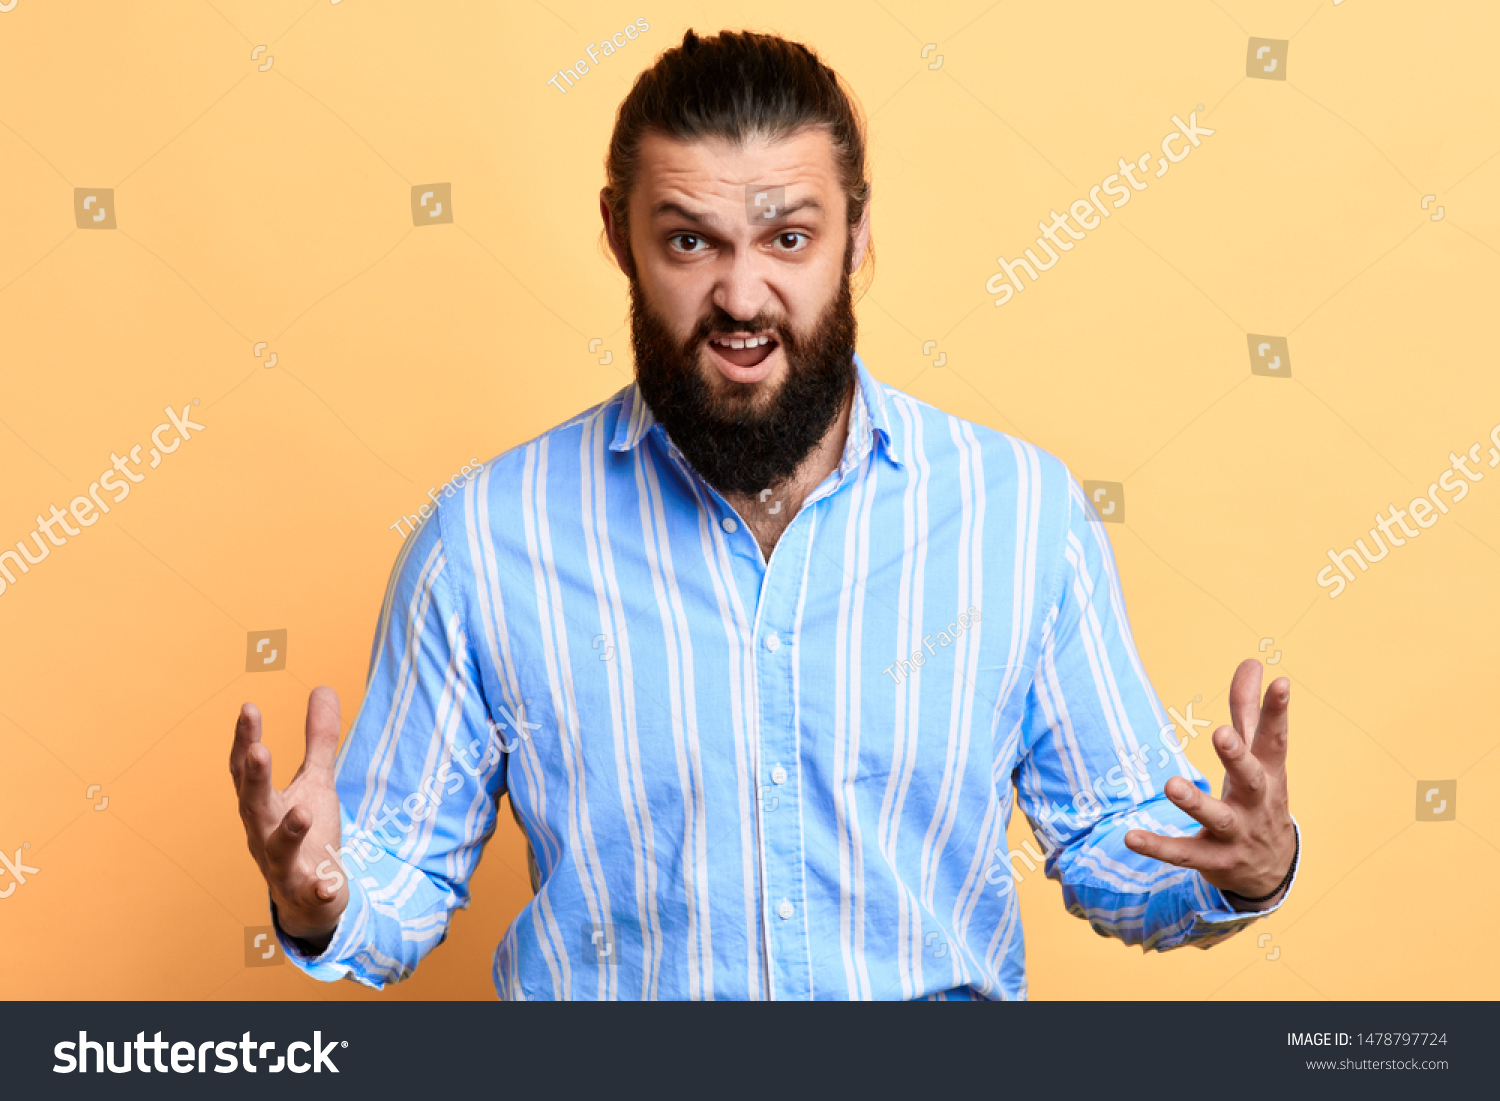 frustrated stylish man with open mouth expressing negative emotion. frustration concept. isolated yellow background #1478797724